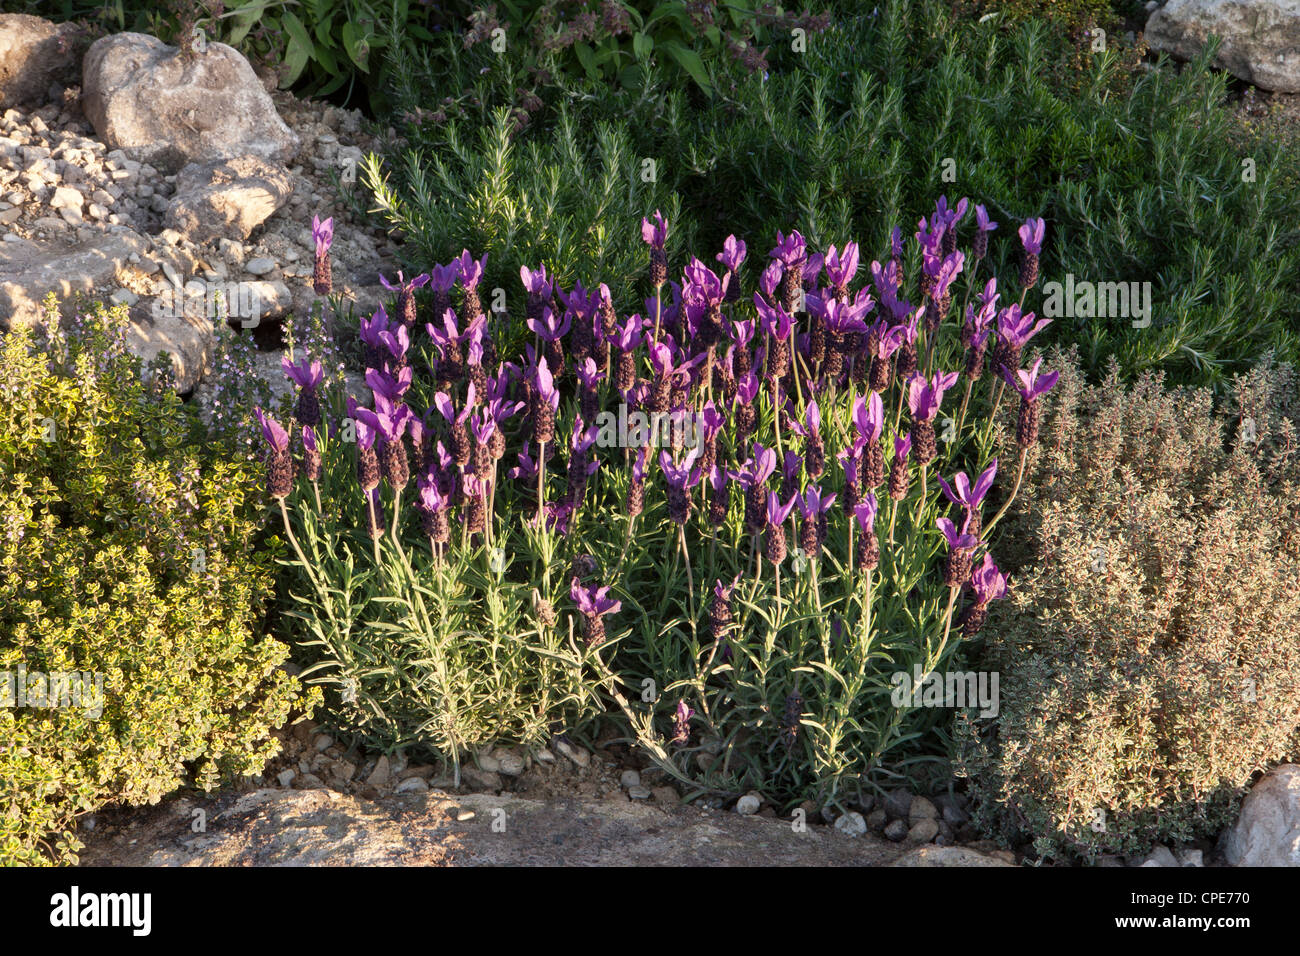 lavender plants flowering and growing in a herb rockery with thyme and rosemary in a Mediterranean garden UK Stock Photo